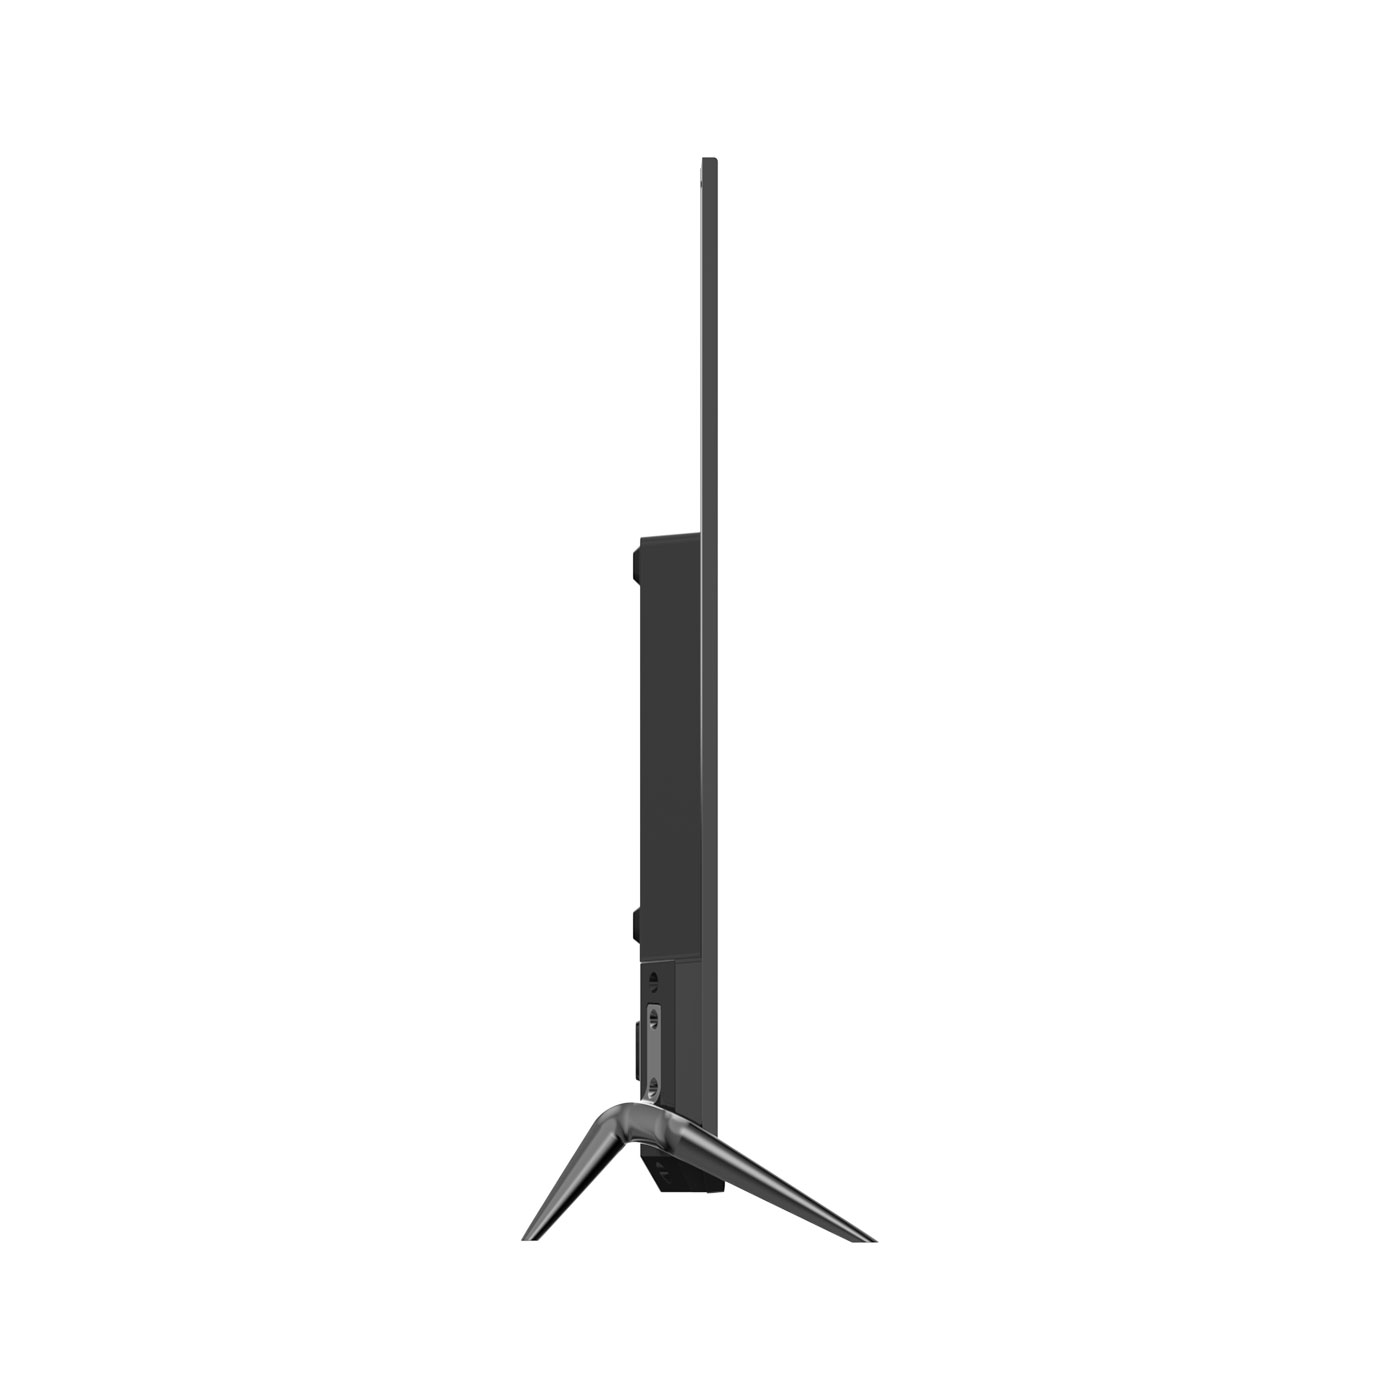 WE-MX43UDG (1.09M)  UHD ANDROID TV